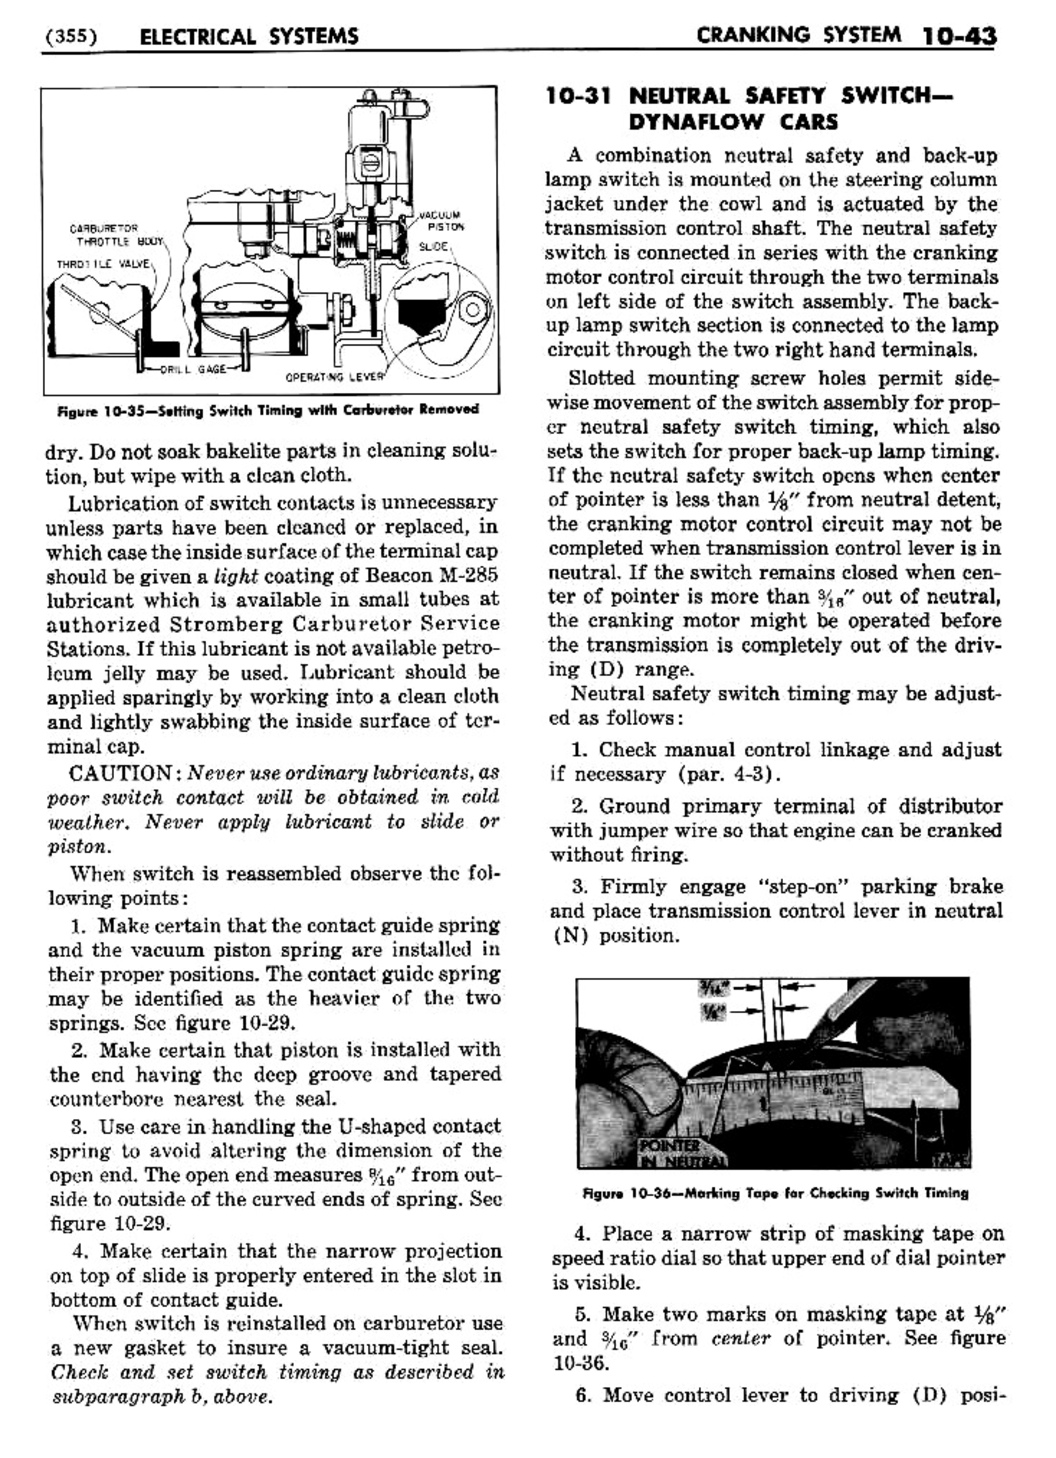 n_11 1954 Buick Shop Manual - Electrical Systems-043-043.jpg